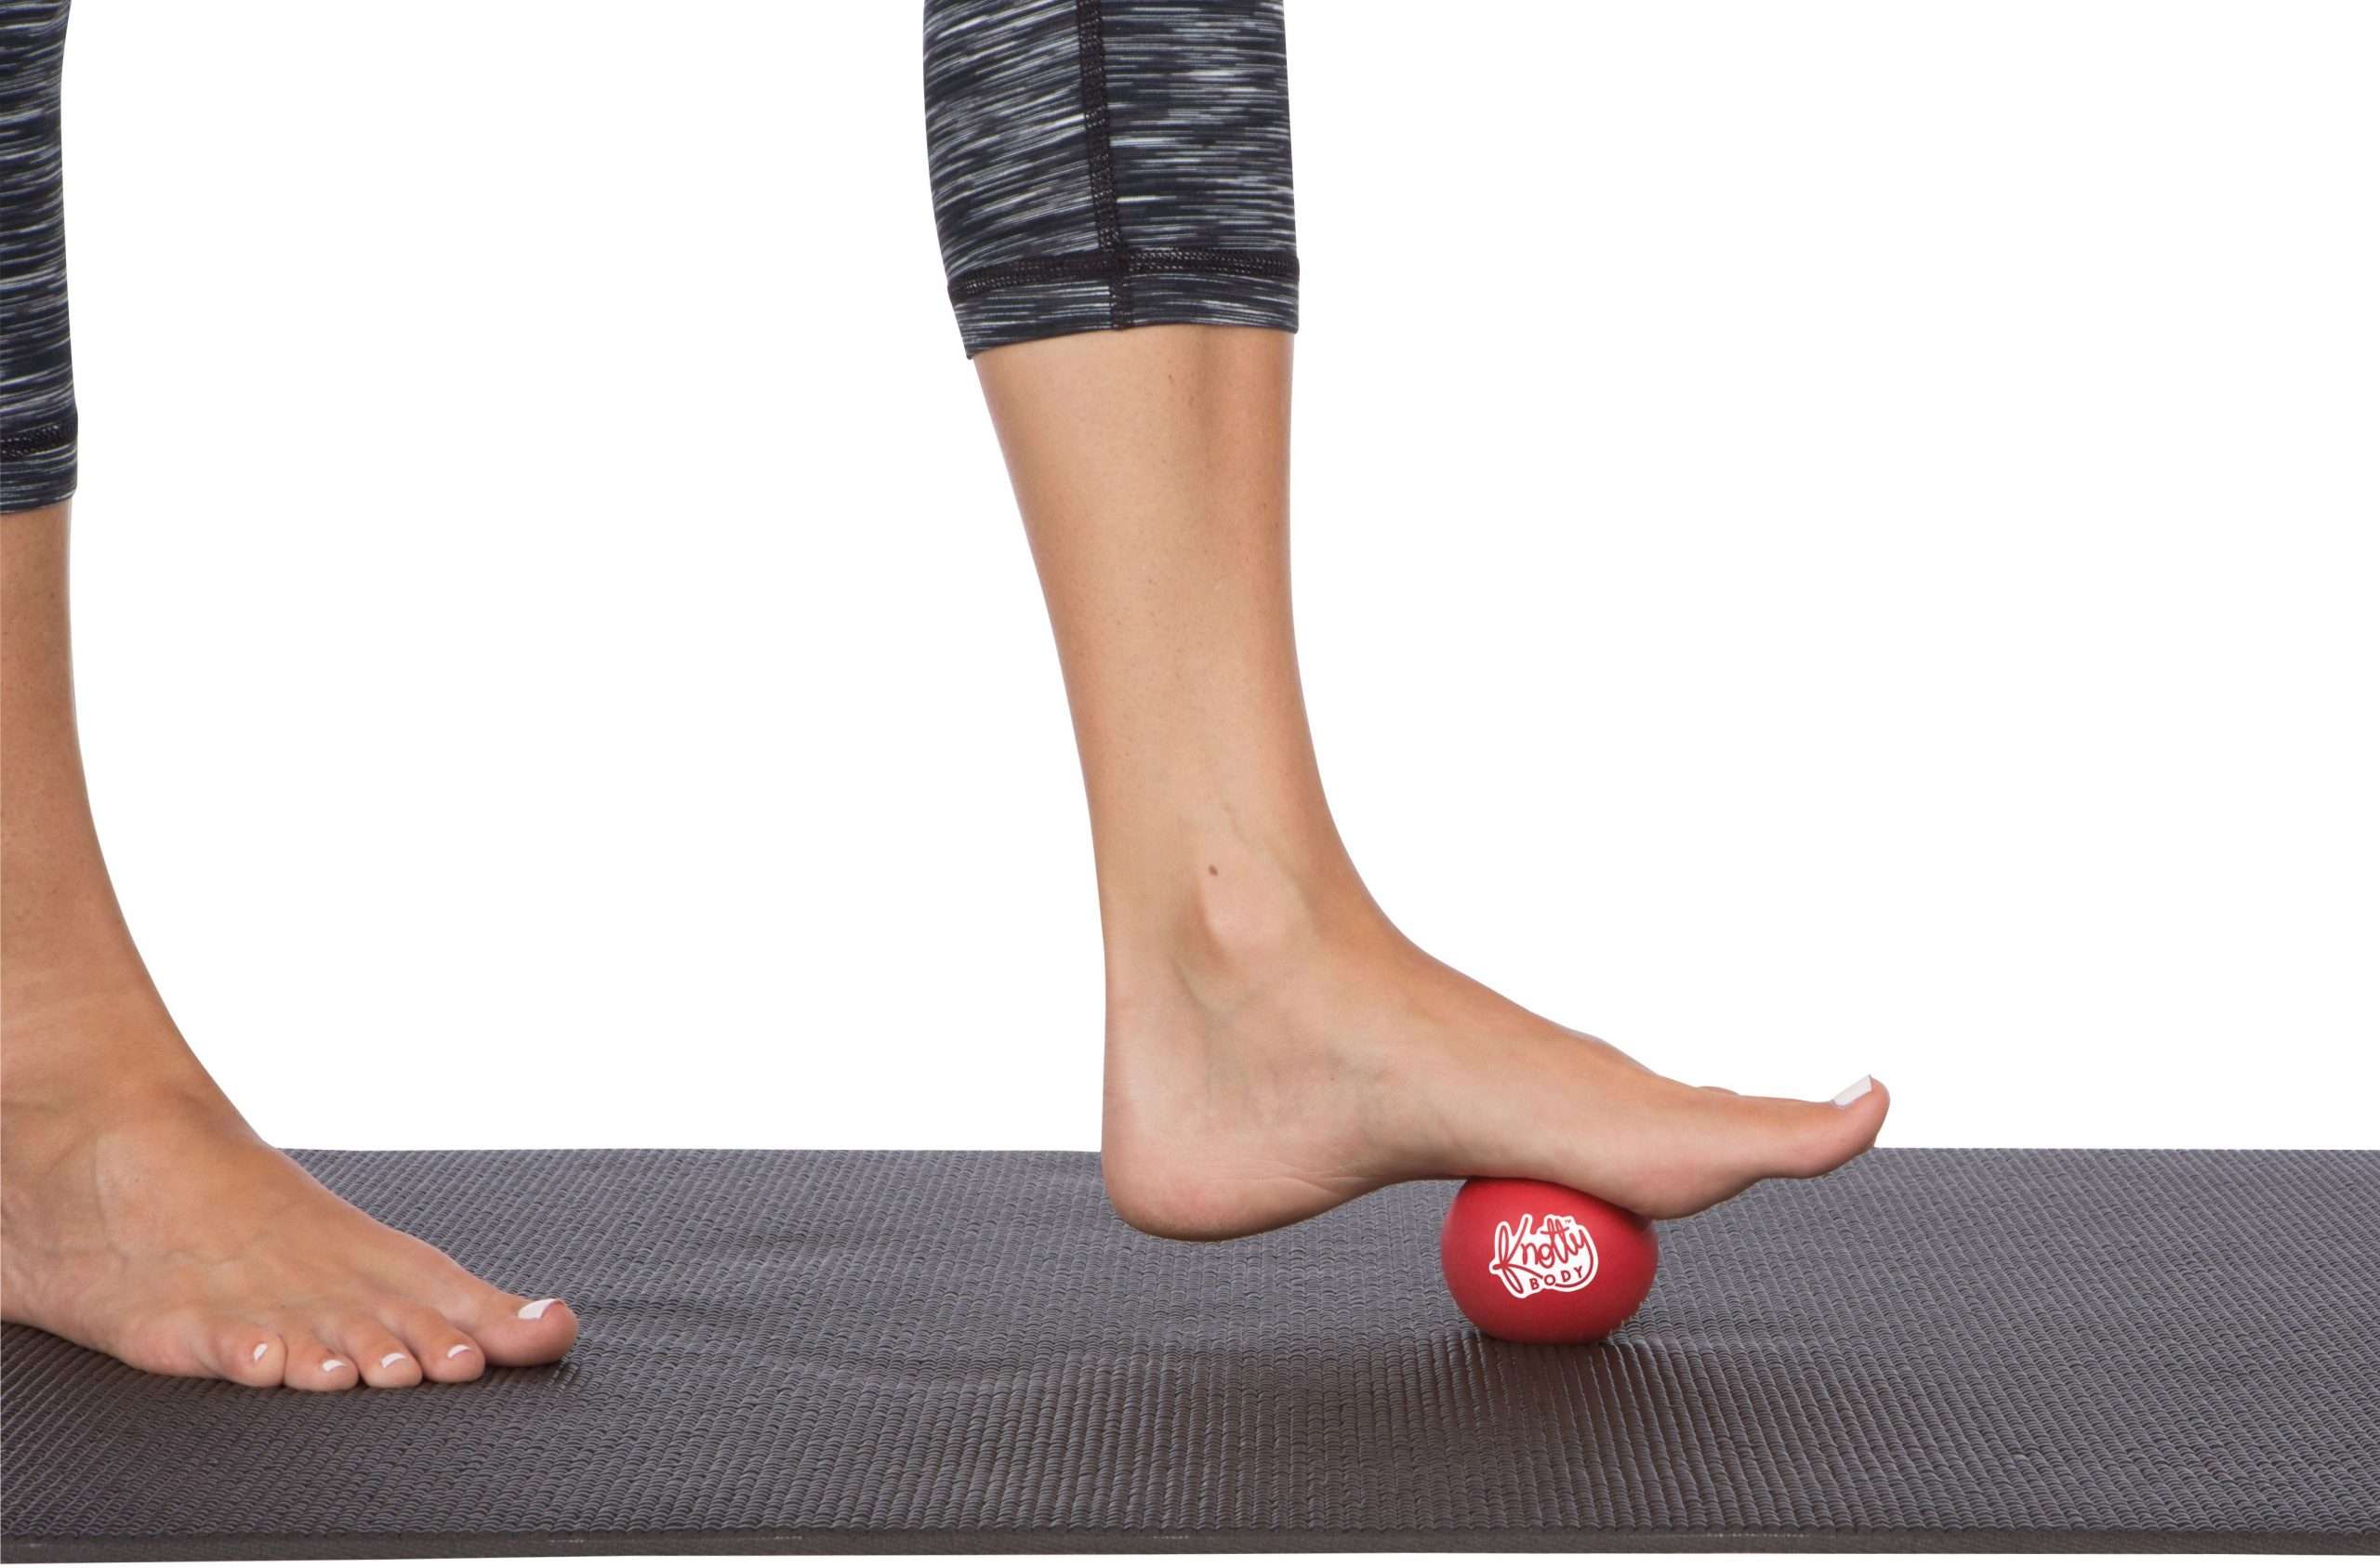 Foot massage ball for plantar fasciitis by Knotty Body ...